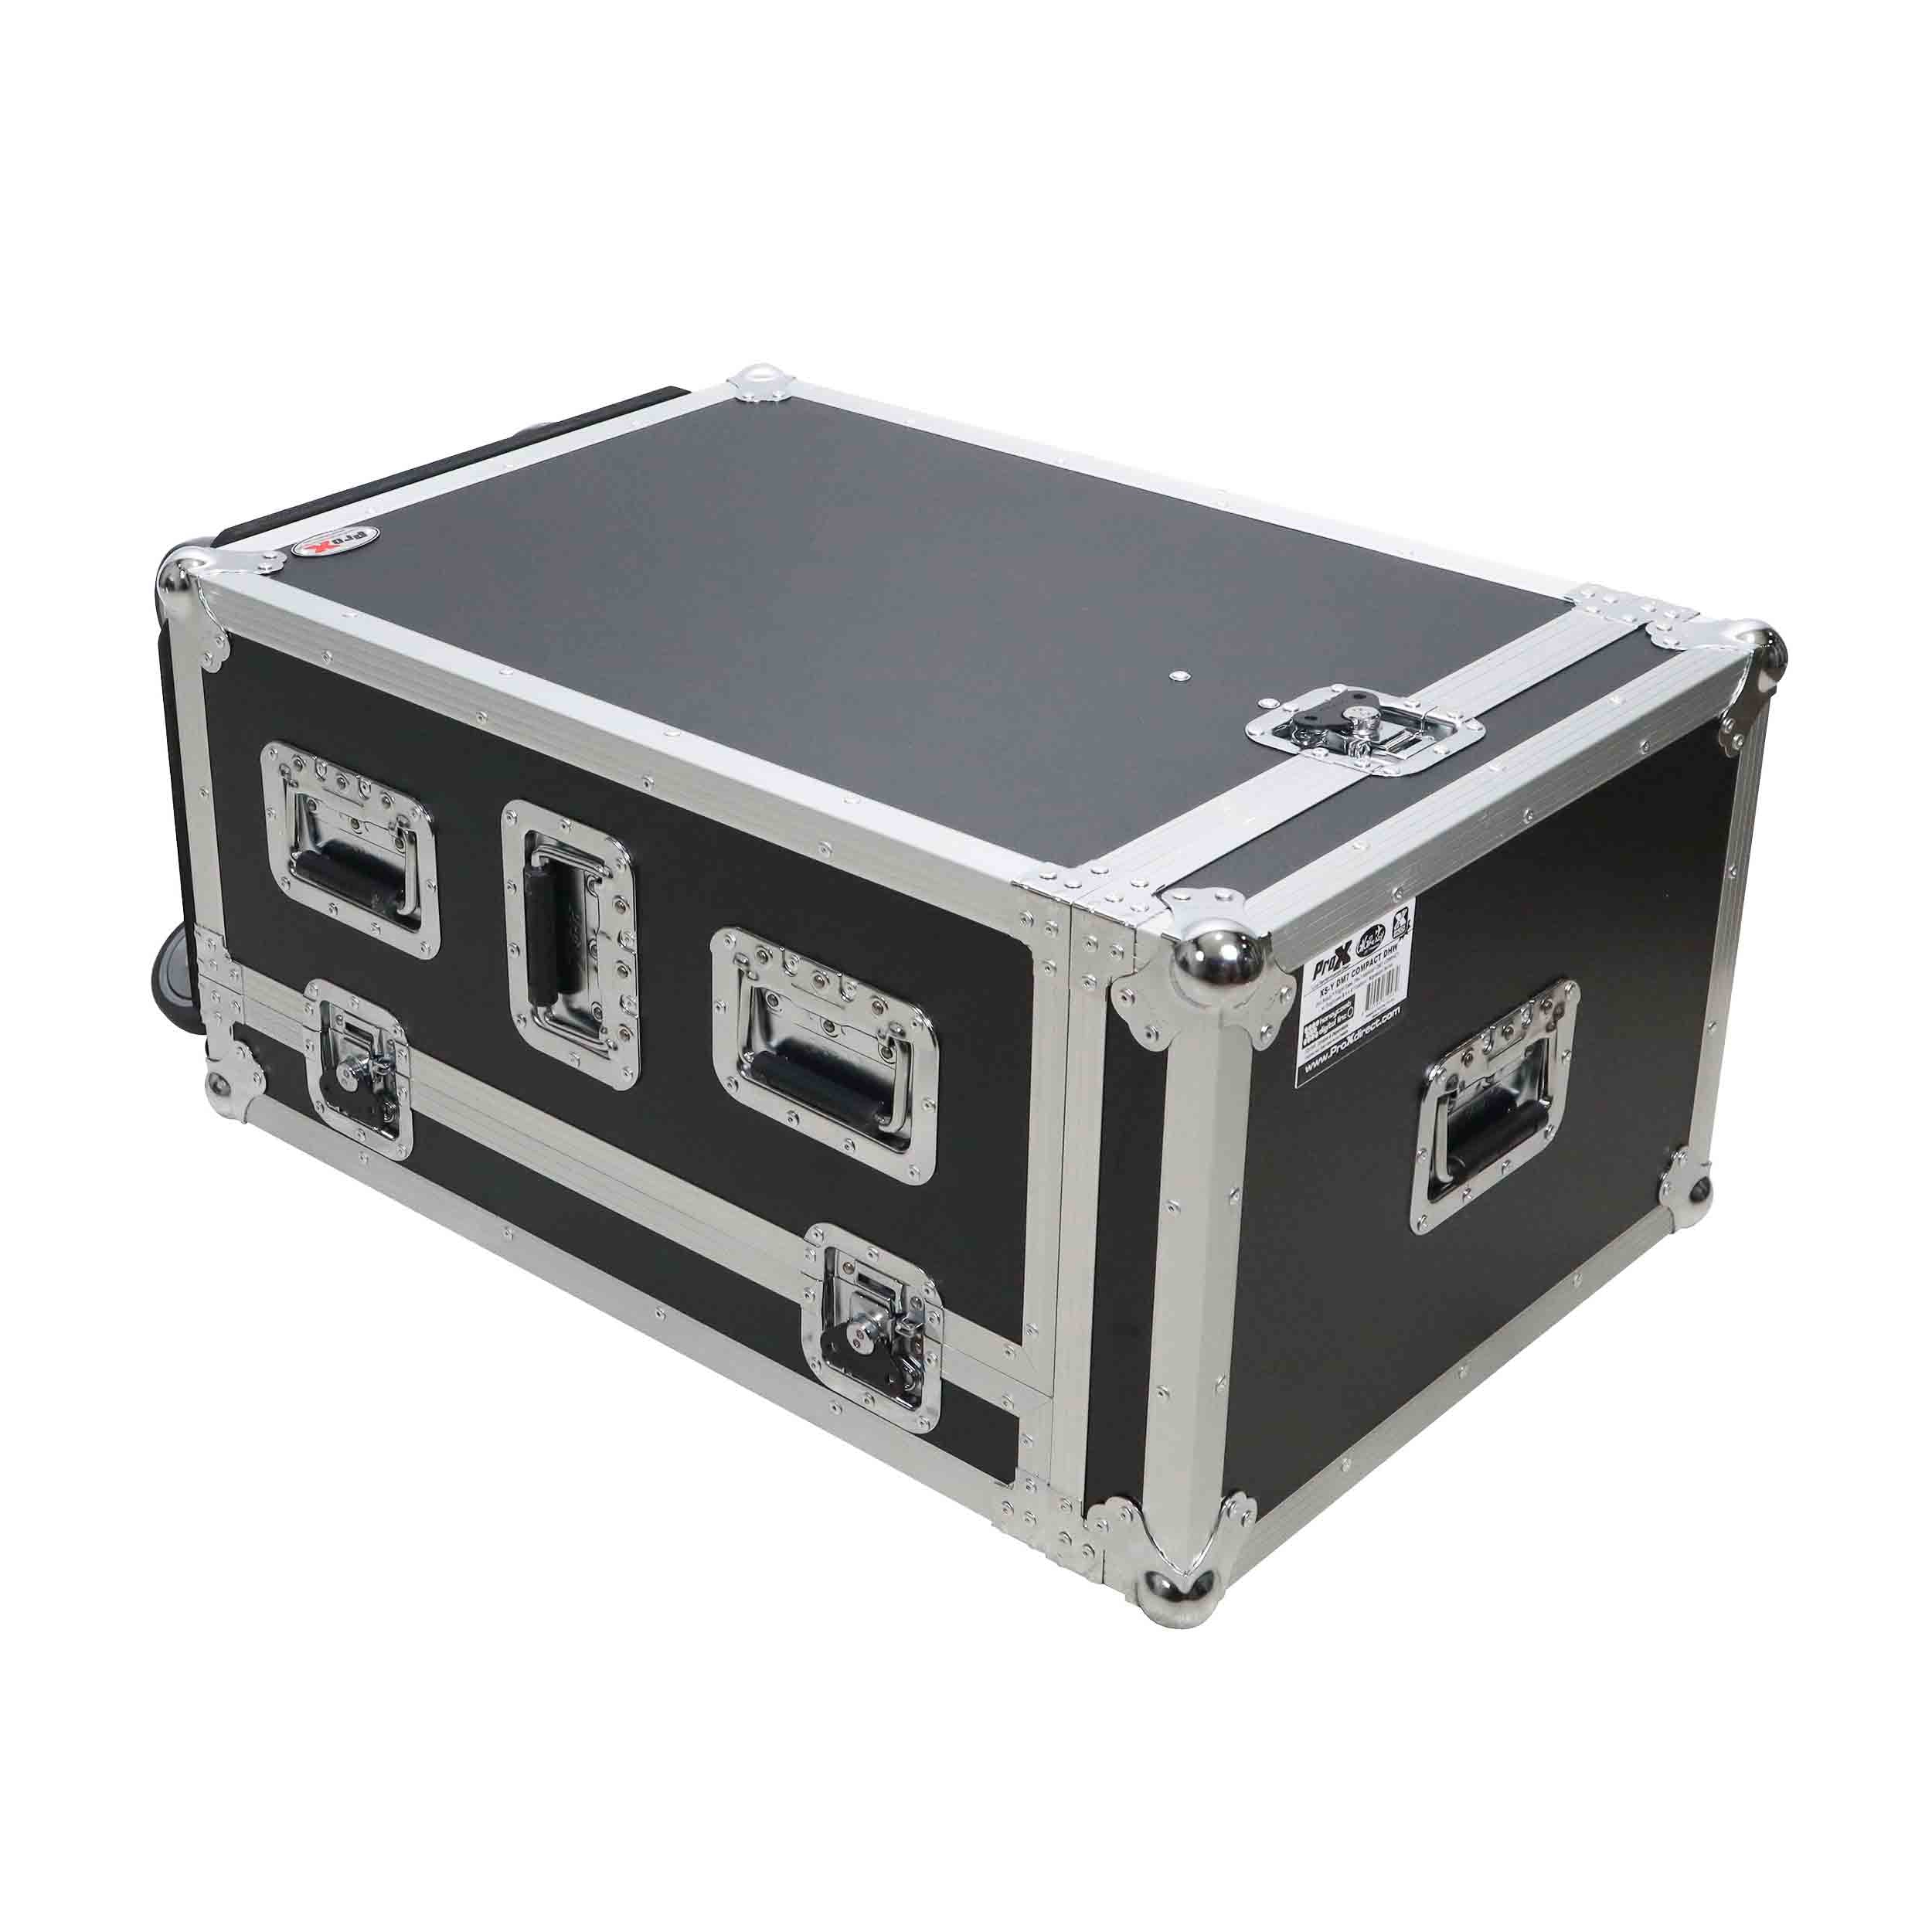 ProX XS-YDM7COMPACTDHW, ATA Digital Audio Mixer Flight Case for Yamaha DM7 Compact Console with Caster Wheels by ProX Cases